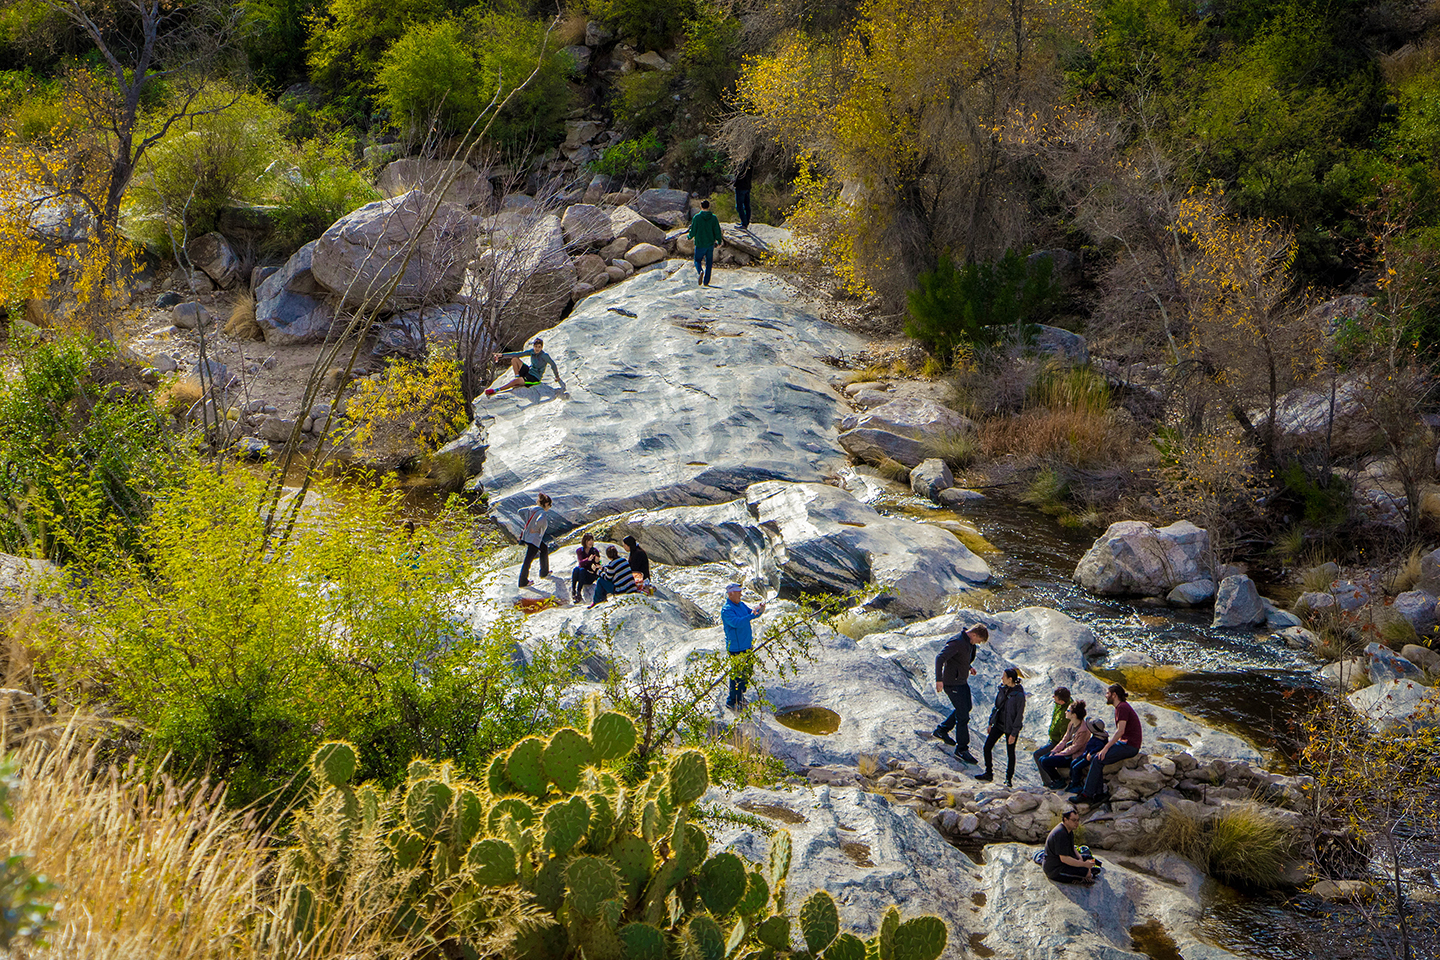 Located in the Catalina Foothills area is Sabino Canyon Recreation Area. A popular place for residents and visitors to hike, walk and enjoy the beauty of the Santa Catalina mountains.